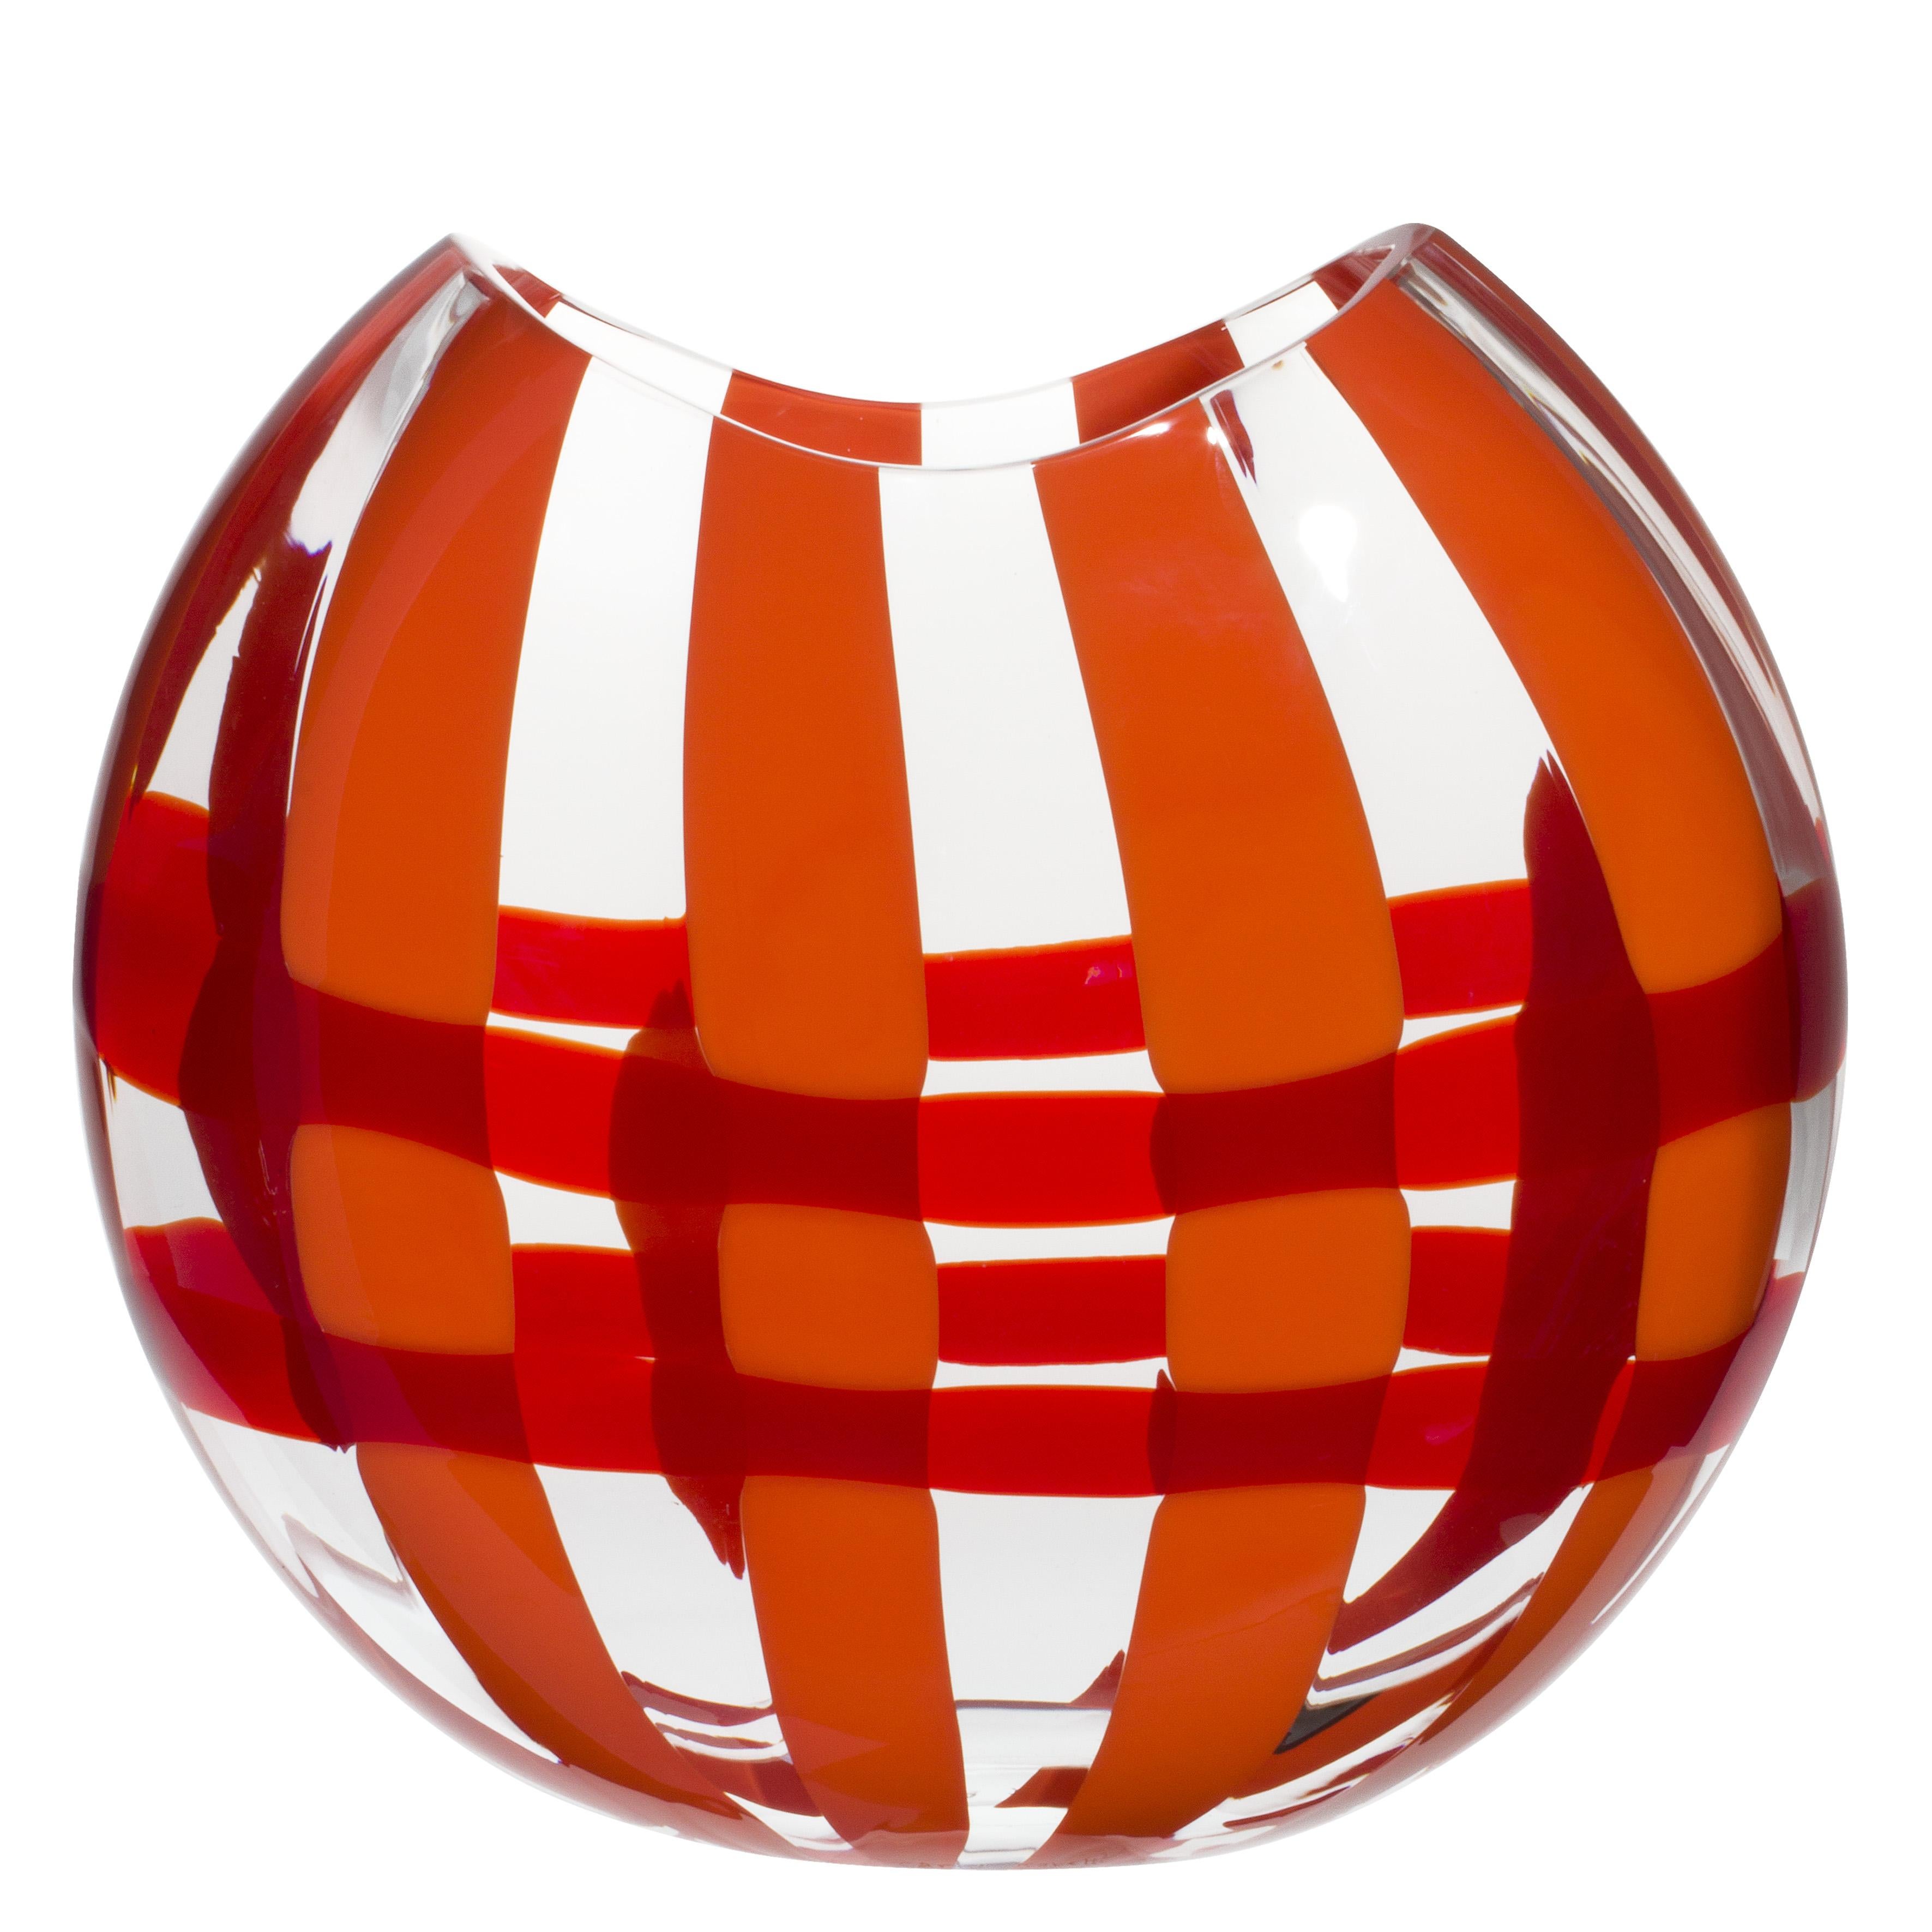 Large Eclissi Vase in Orange and Red by Carlo Moretti